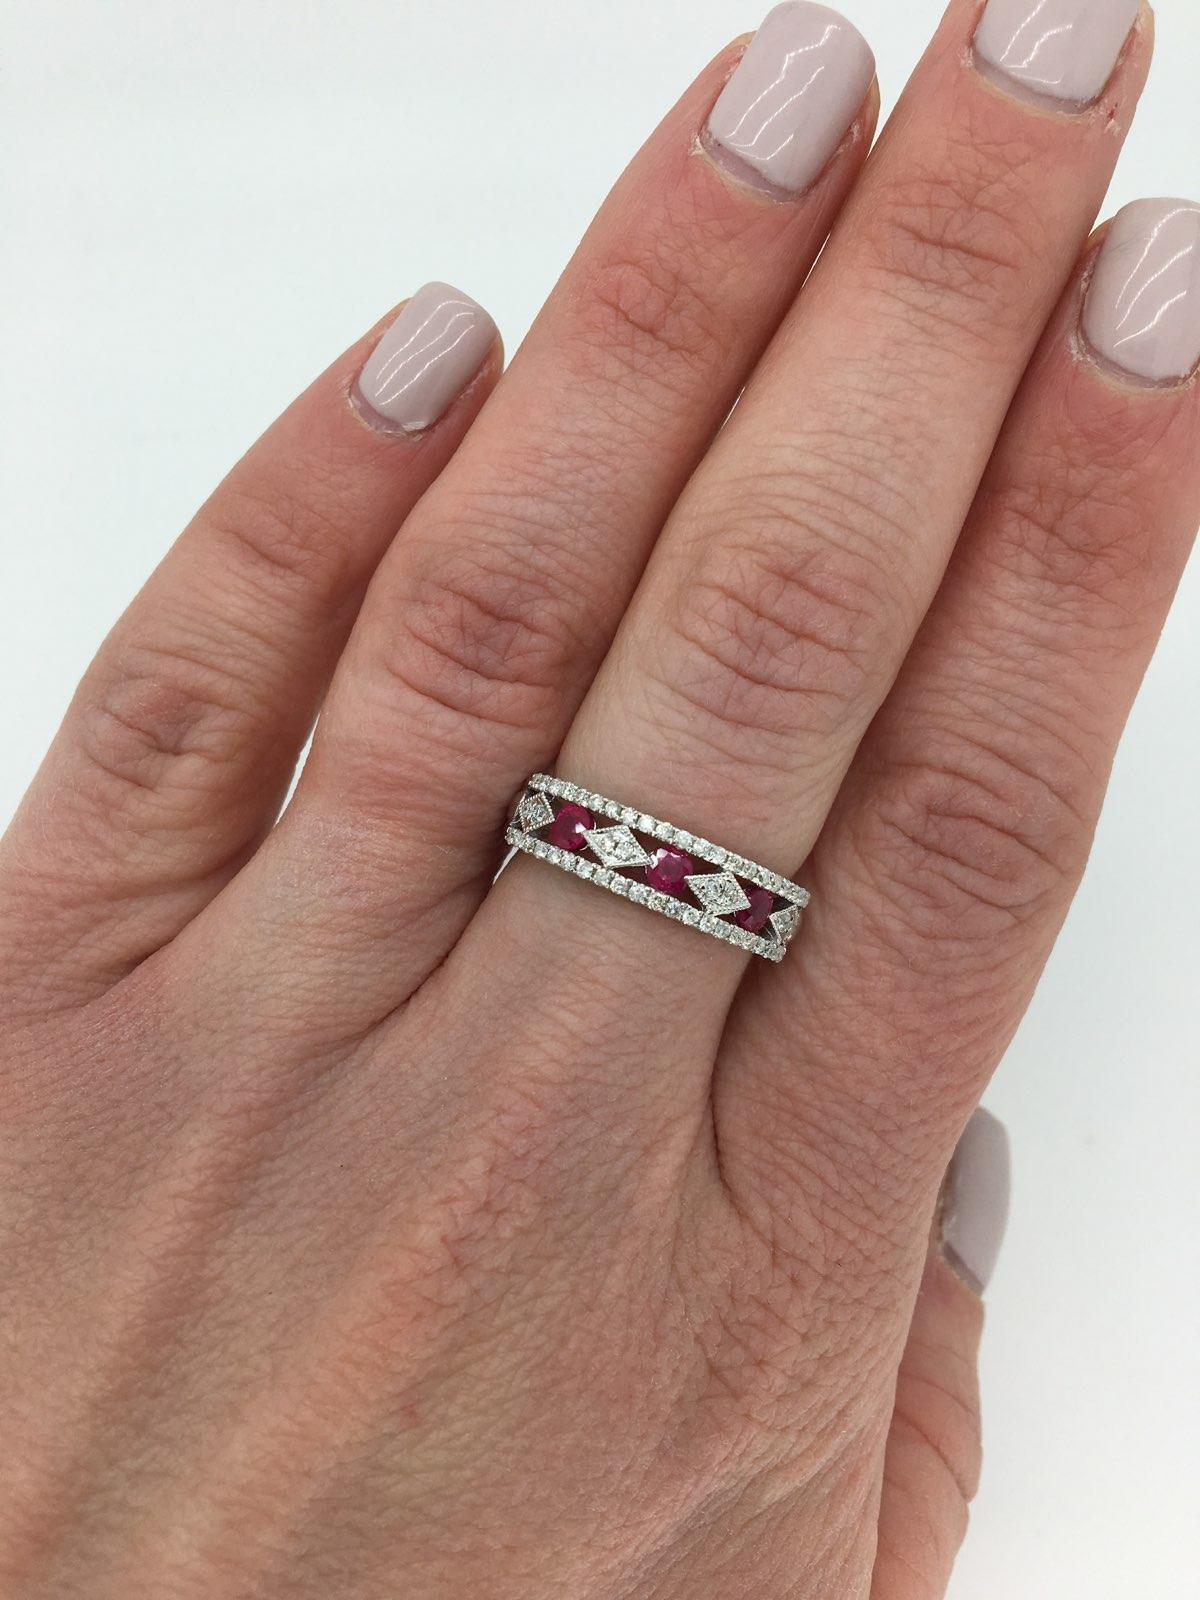 Uniquely designed Ruby and Diamond band crafted in 14K white gold.

Gemstone: Ruby & Diamond
Gemstone Carat Weight: Approximately .44CTW Round Cut Rubies
Diamond Carat Weight:  Approximately .32CTW
Diamond Cut: Round Brilliant
Color: Average